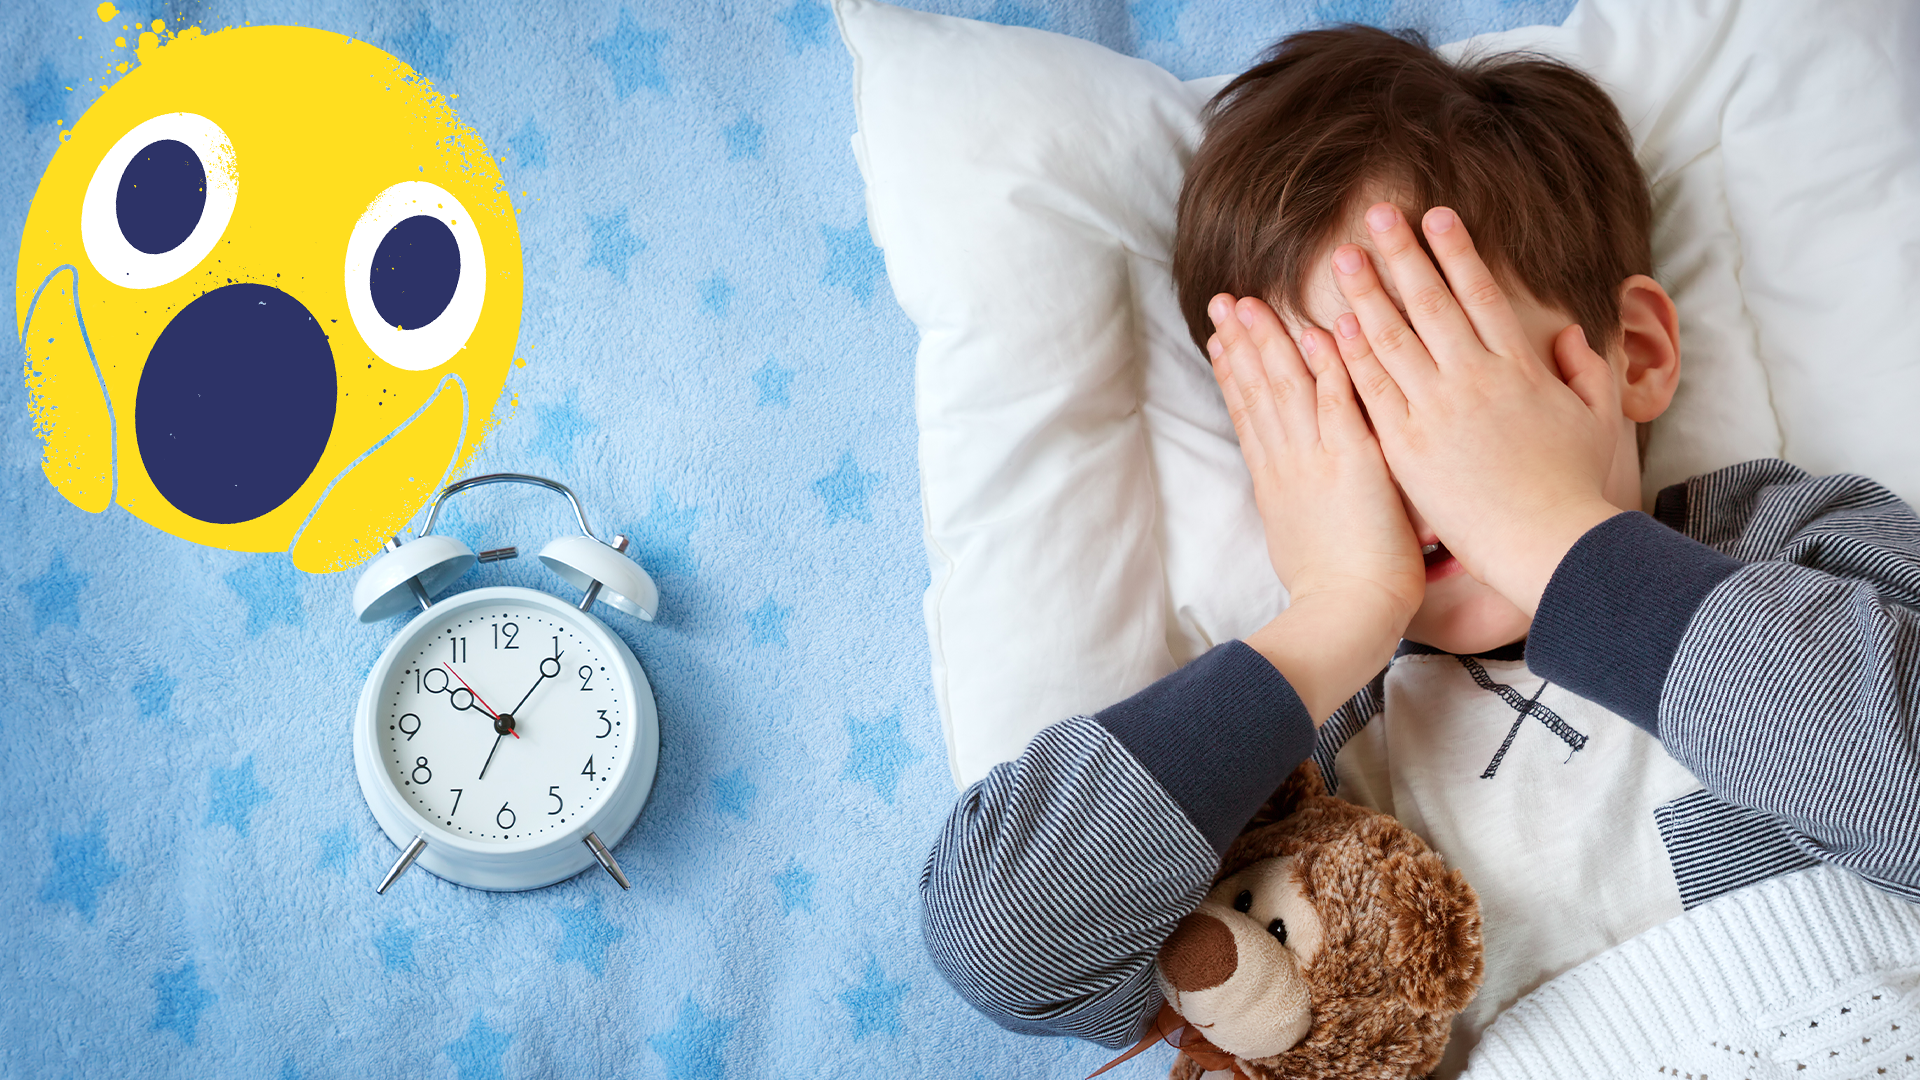 Boy in bed, late, with alarm clock and shocked emoji 